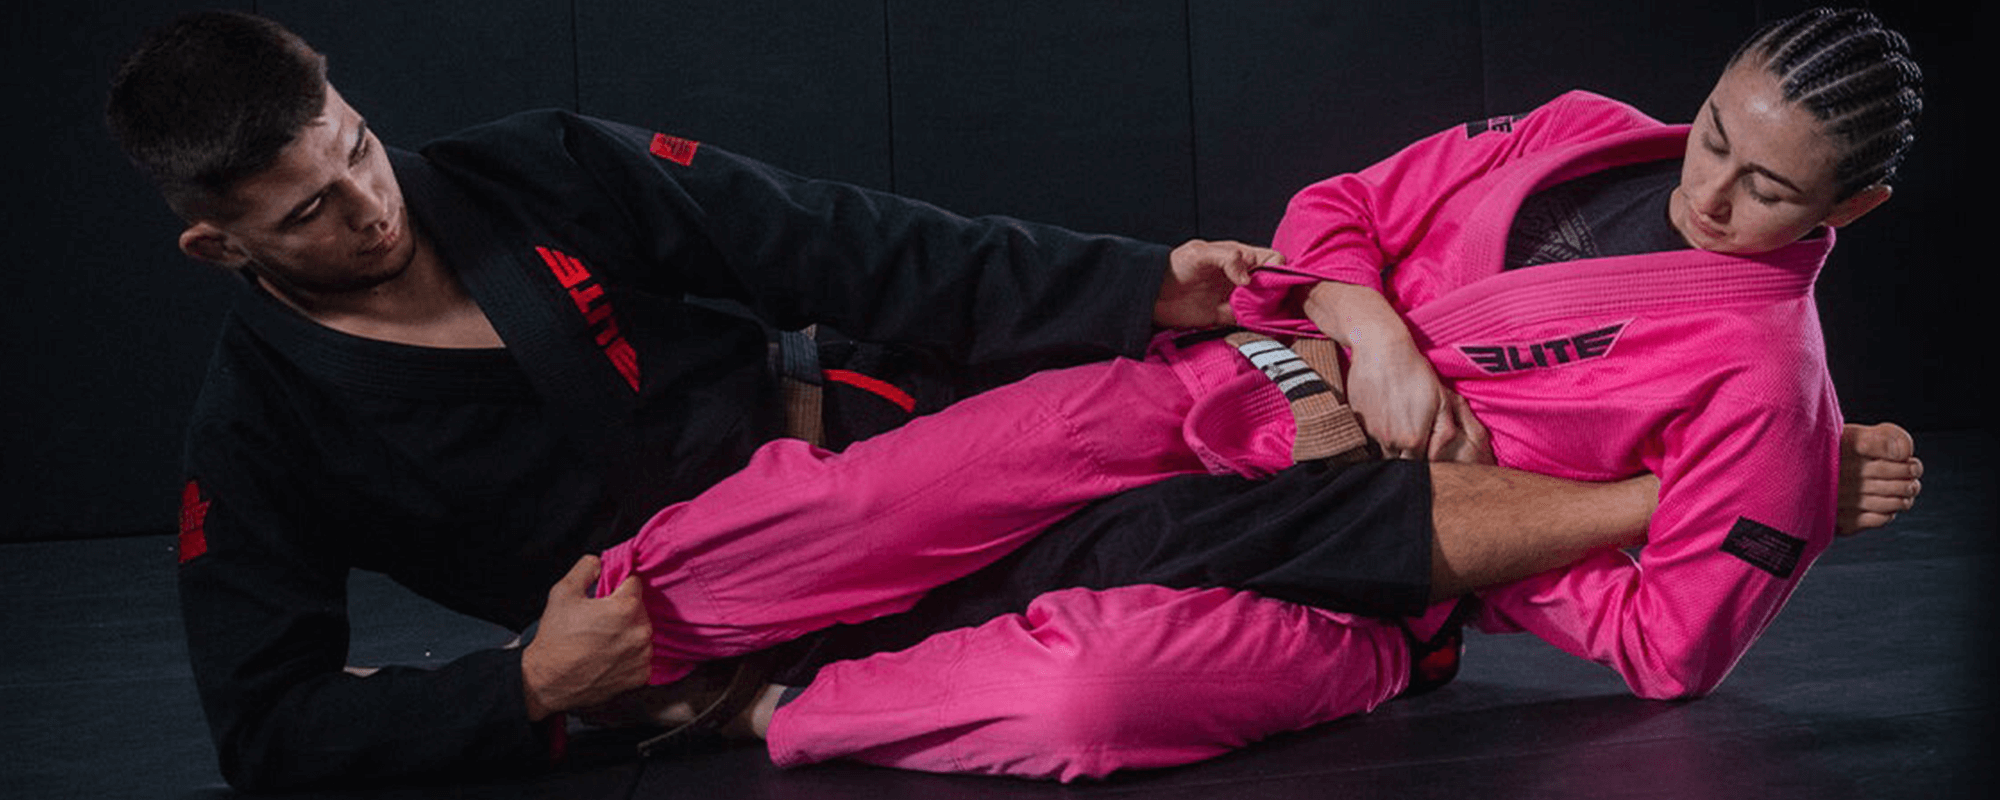 What is Knee Reaping In BJJ?